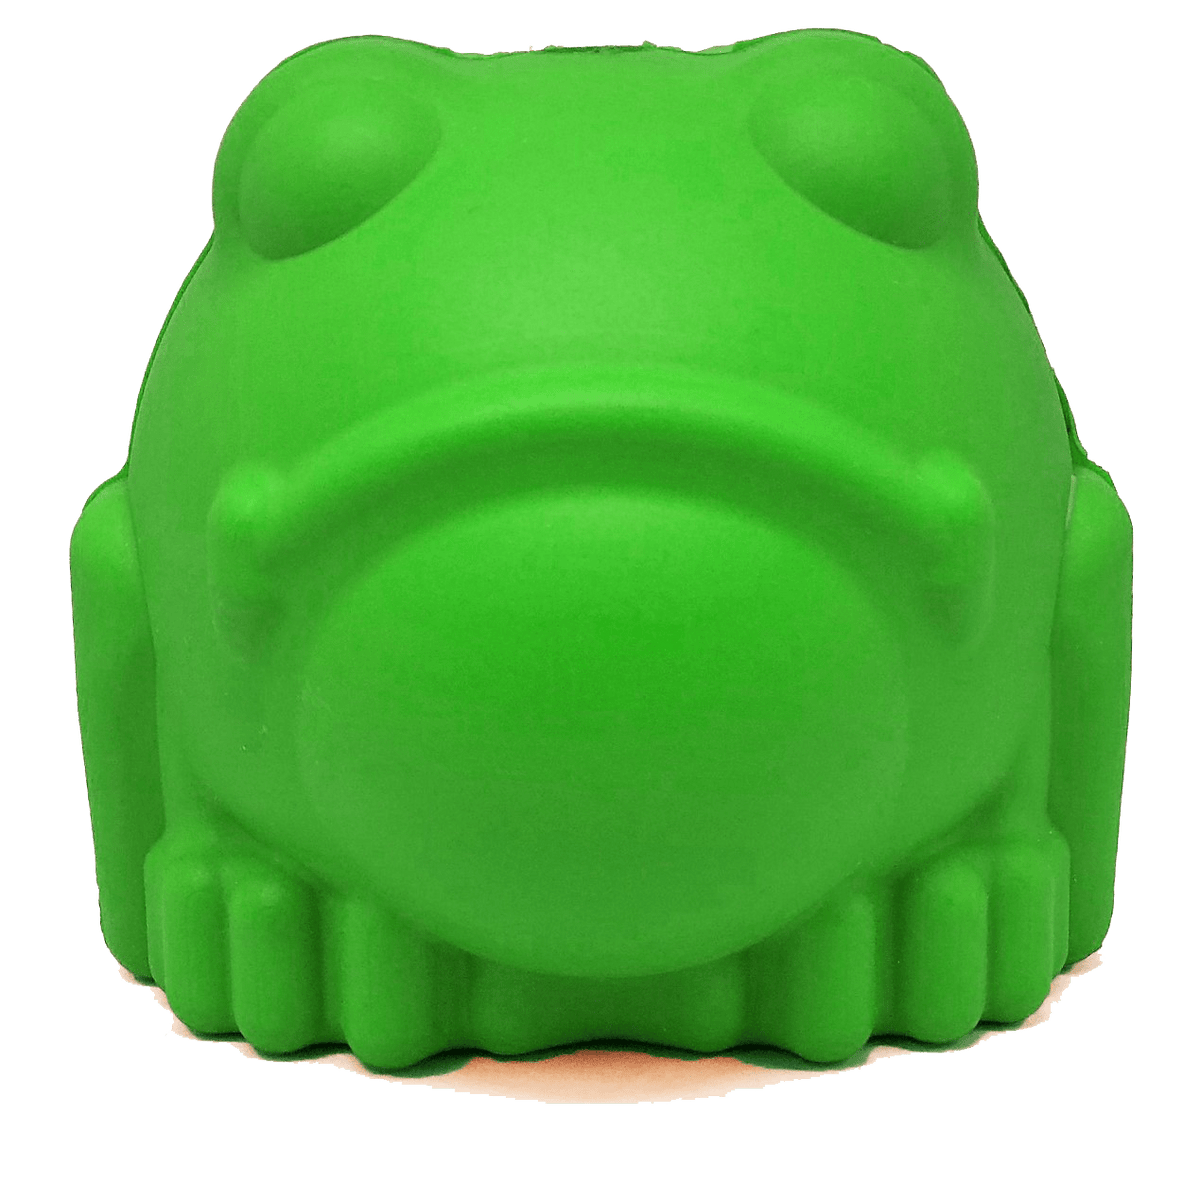 OM Cute Rubber Frog Toy